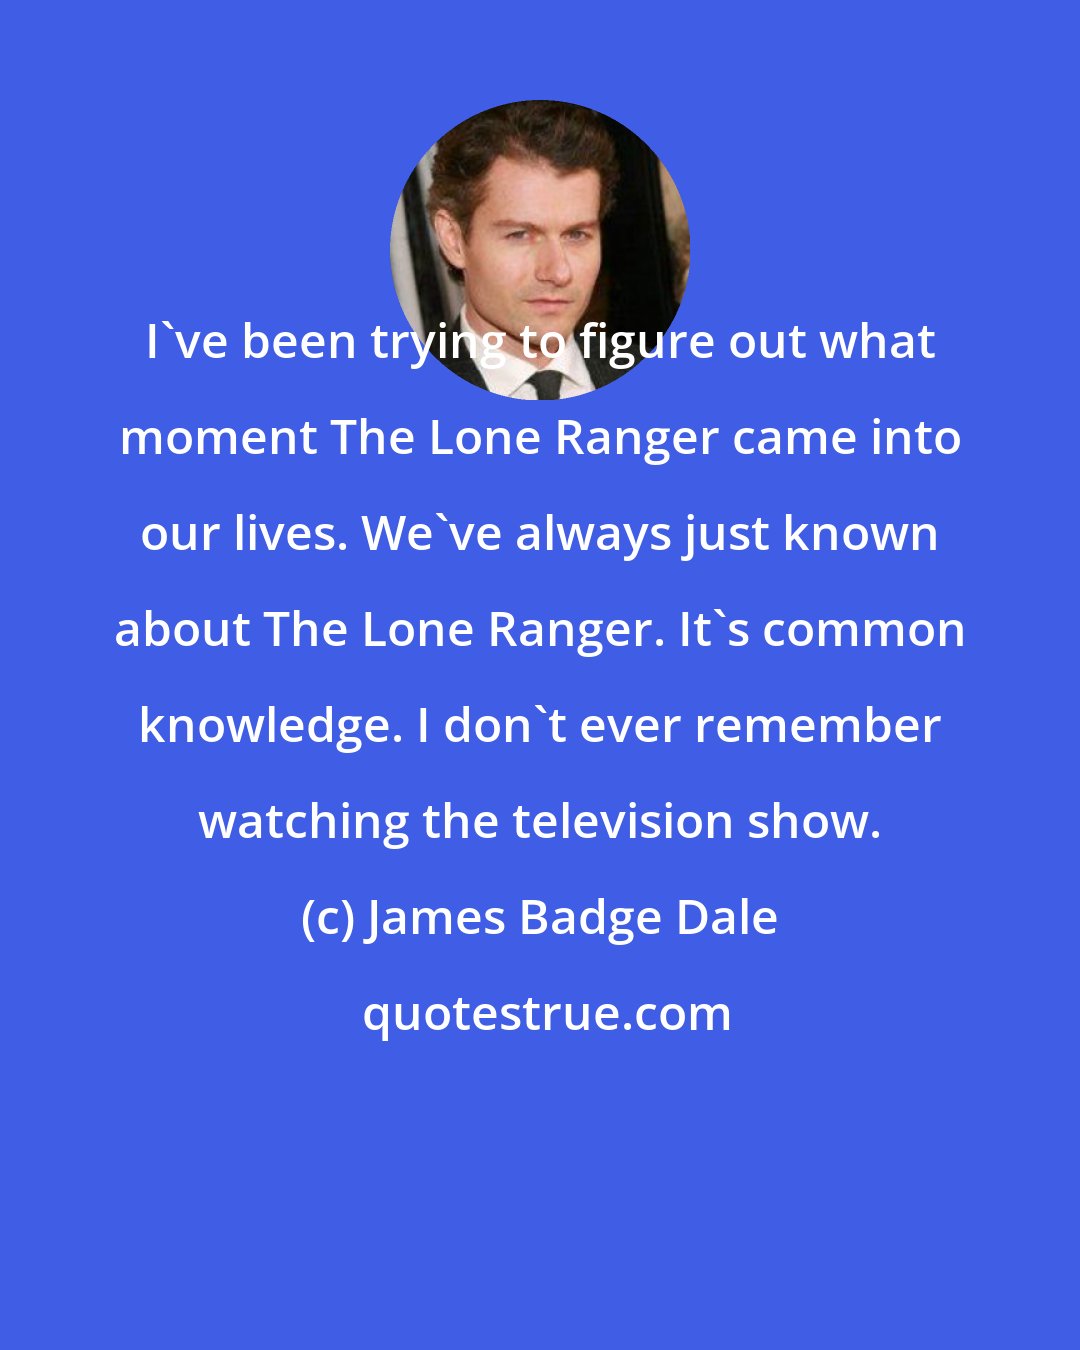 James Badge Dale: I've been trying to figure out what moment The Lone Ranger came into our lives. We've always just known about The Lone Ranger. It's common knowledge. I don't ever remember watching the television show.